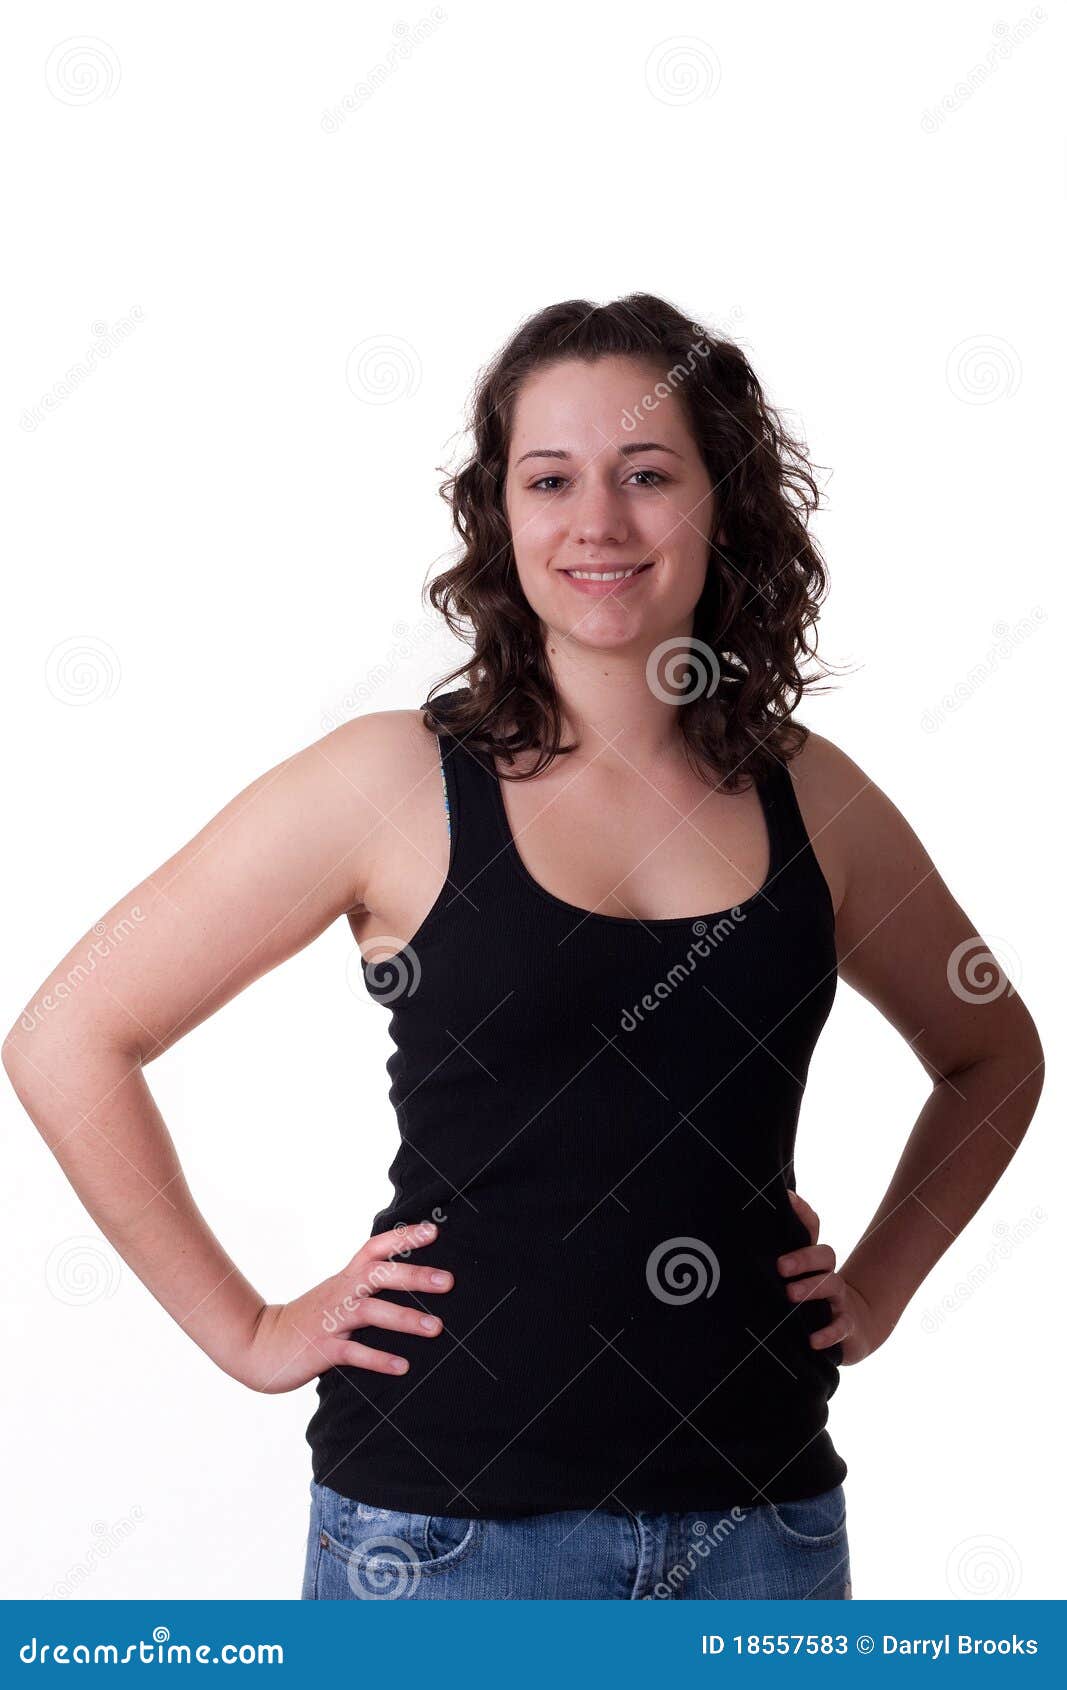 Fitness Young Pretty Woman In Black Leggings And Tank Top Posing